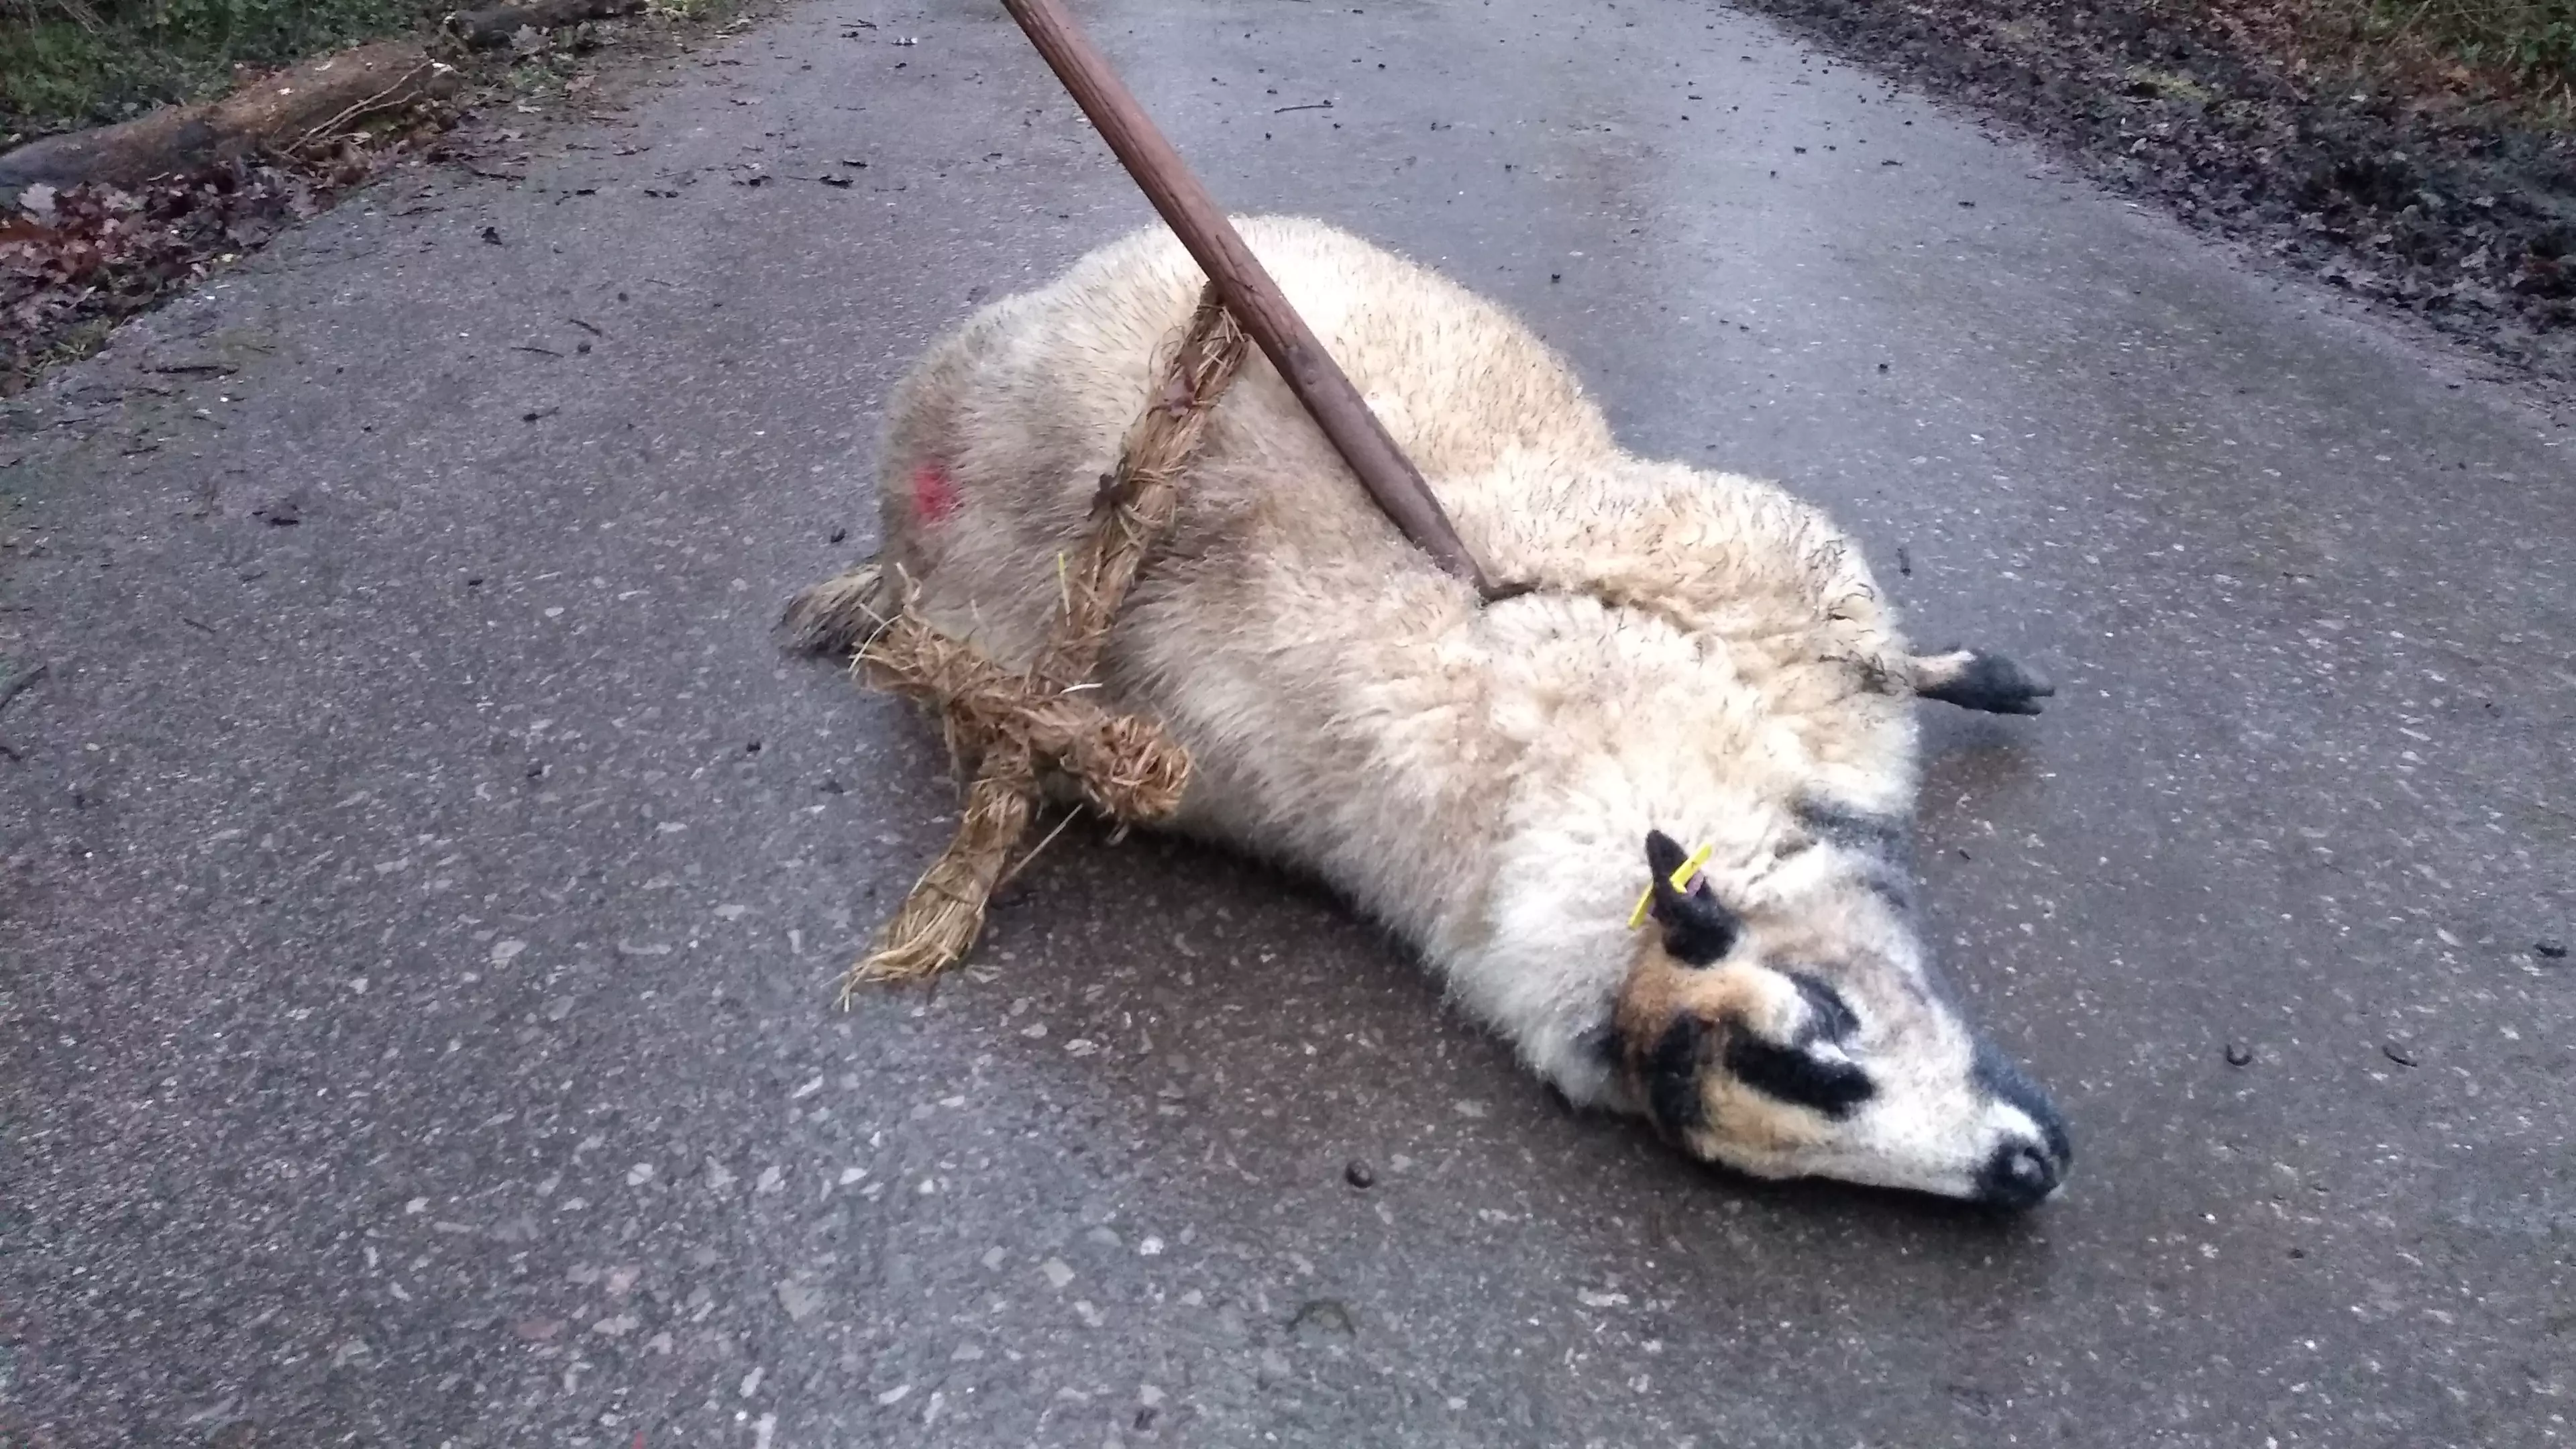 Police Launch Investigation After Three More Sheep Found Dead With 'Satanic' Markings